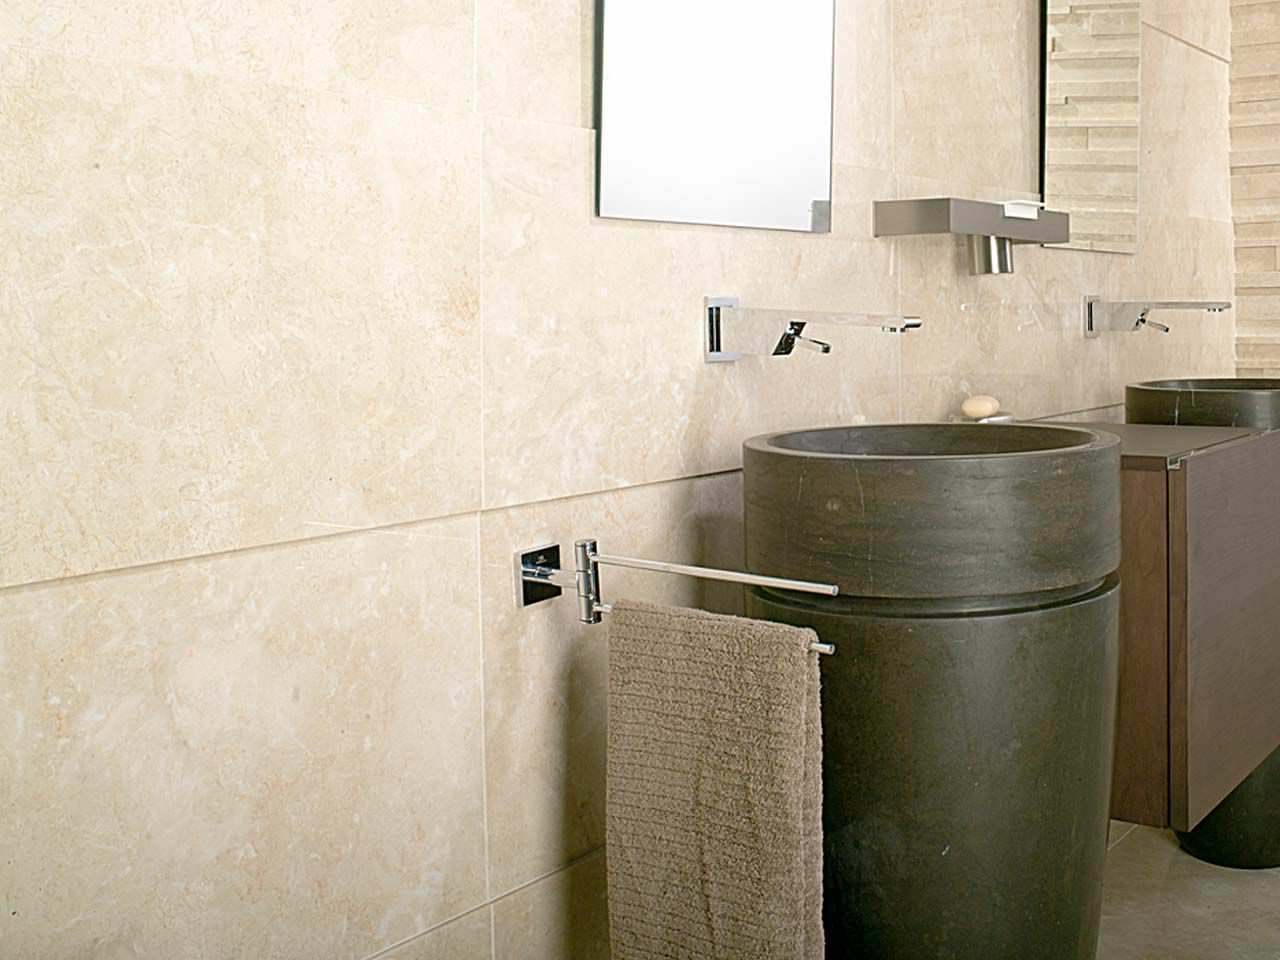 indoor-tile-bathrooms-wall-natural-stone-12-6408689